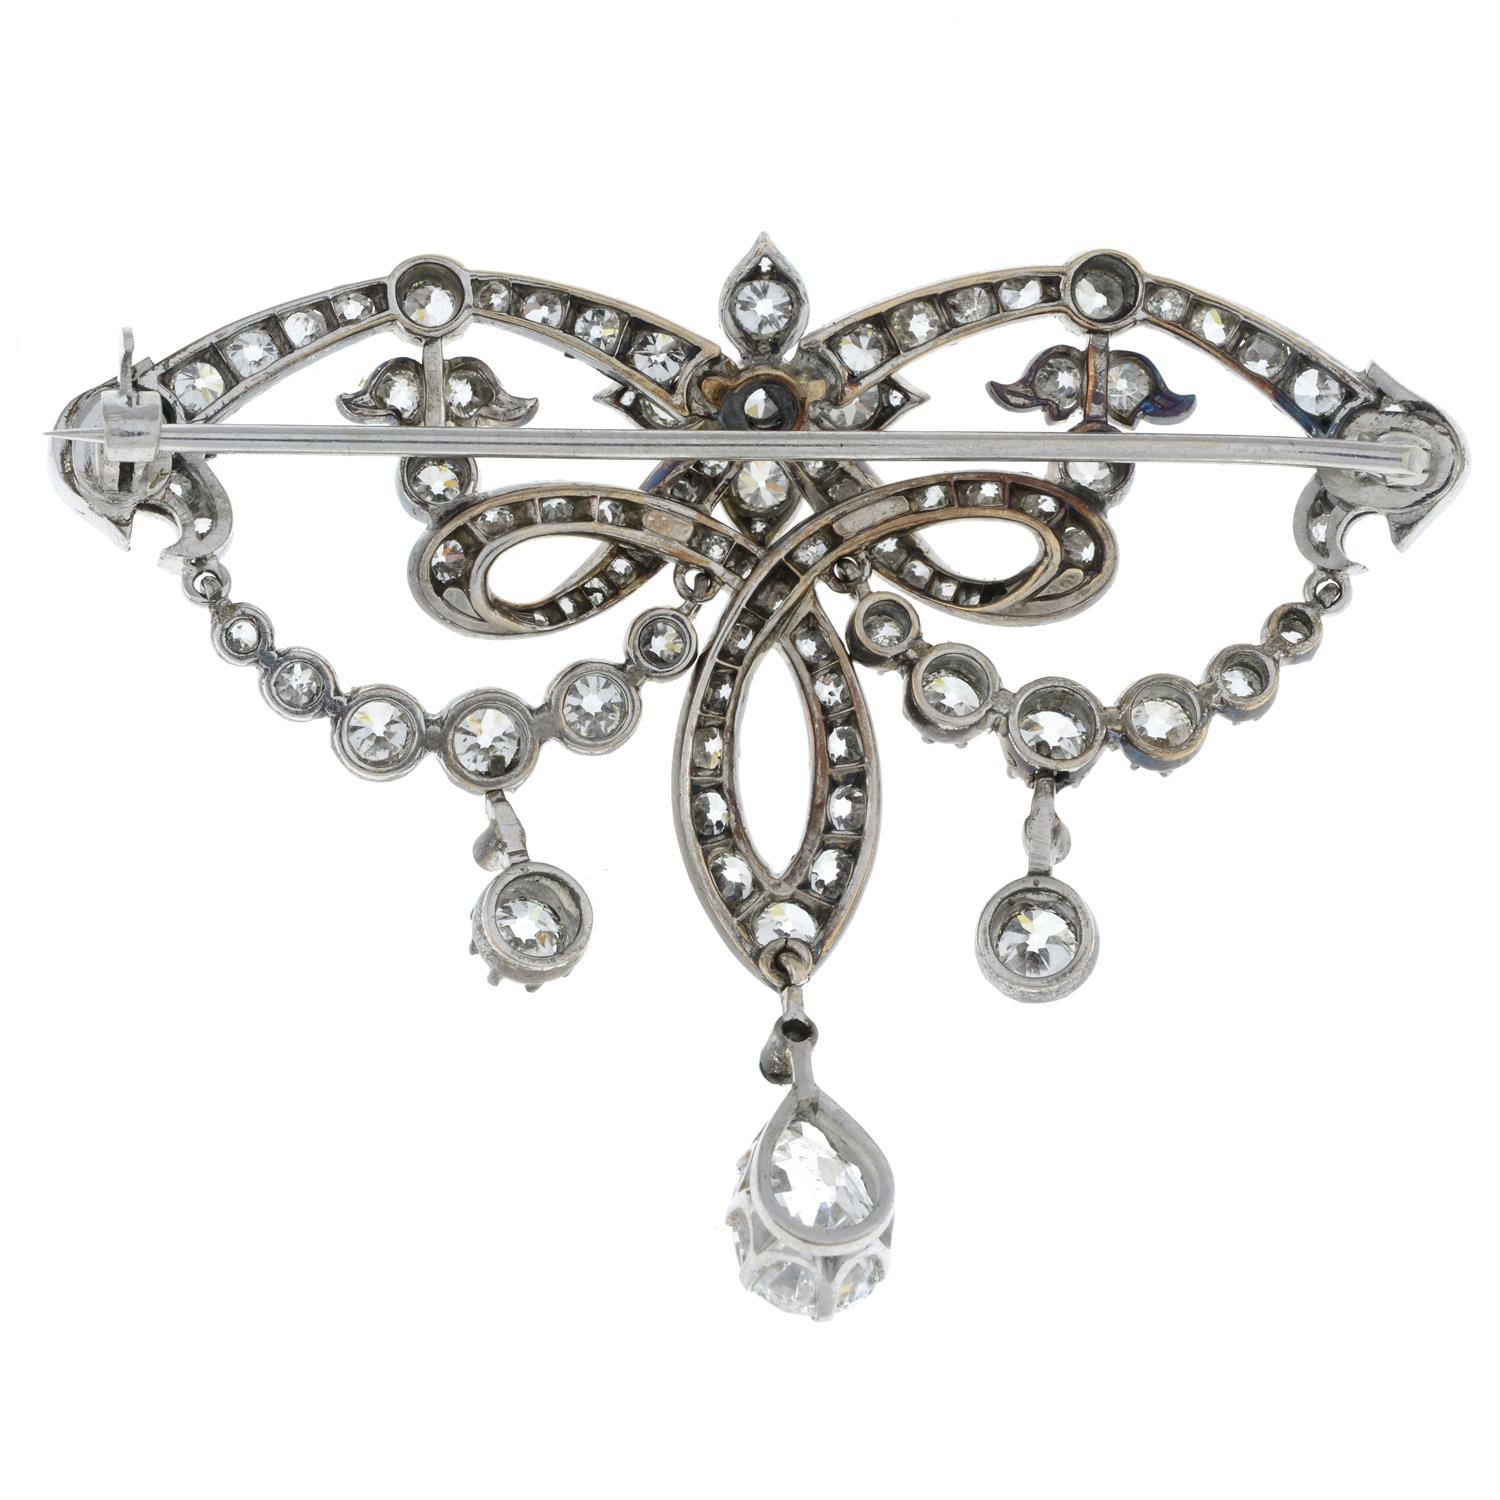 19th century silver and gold diamond brooch - Image 3 of 4